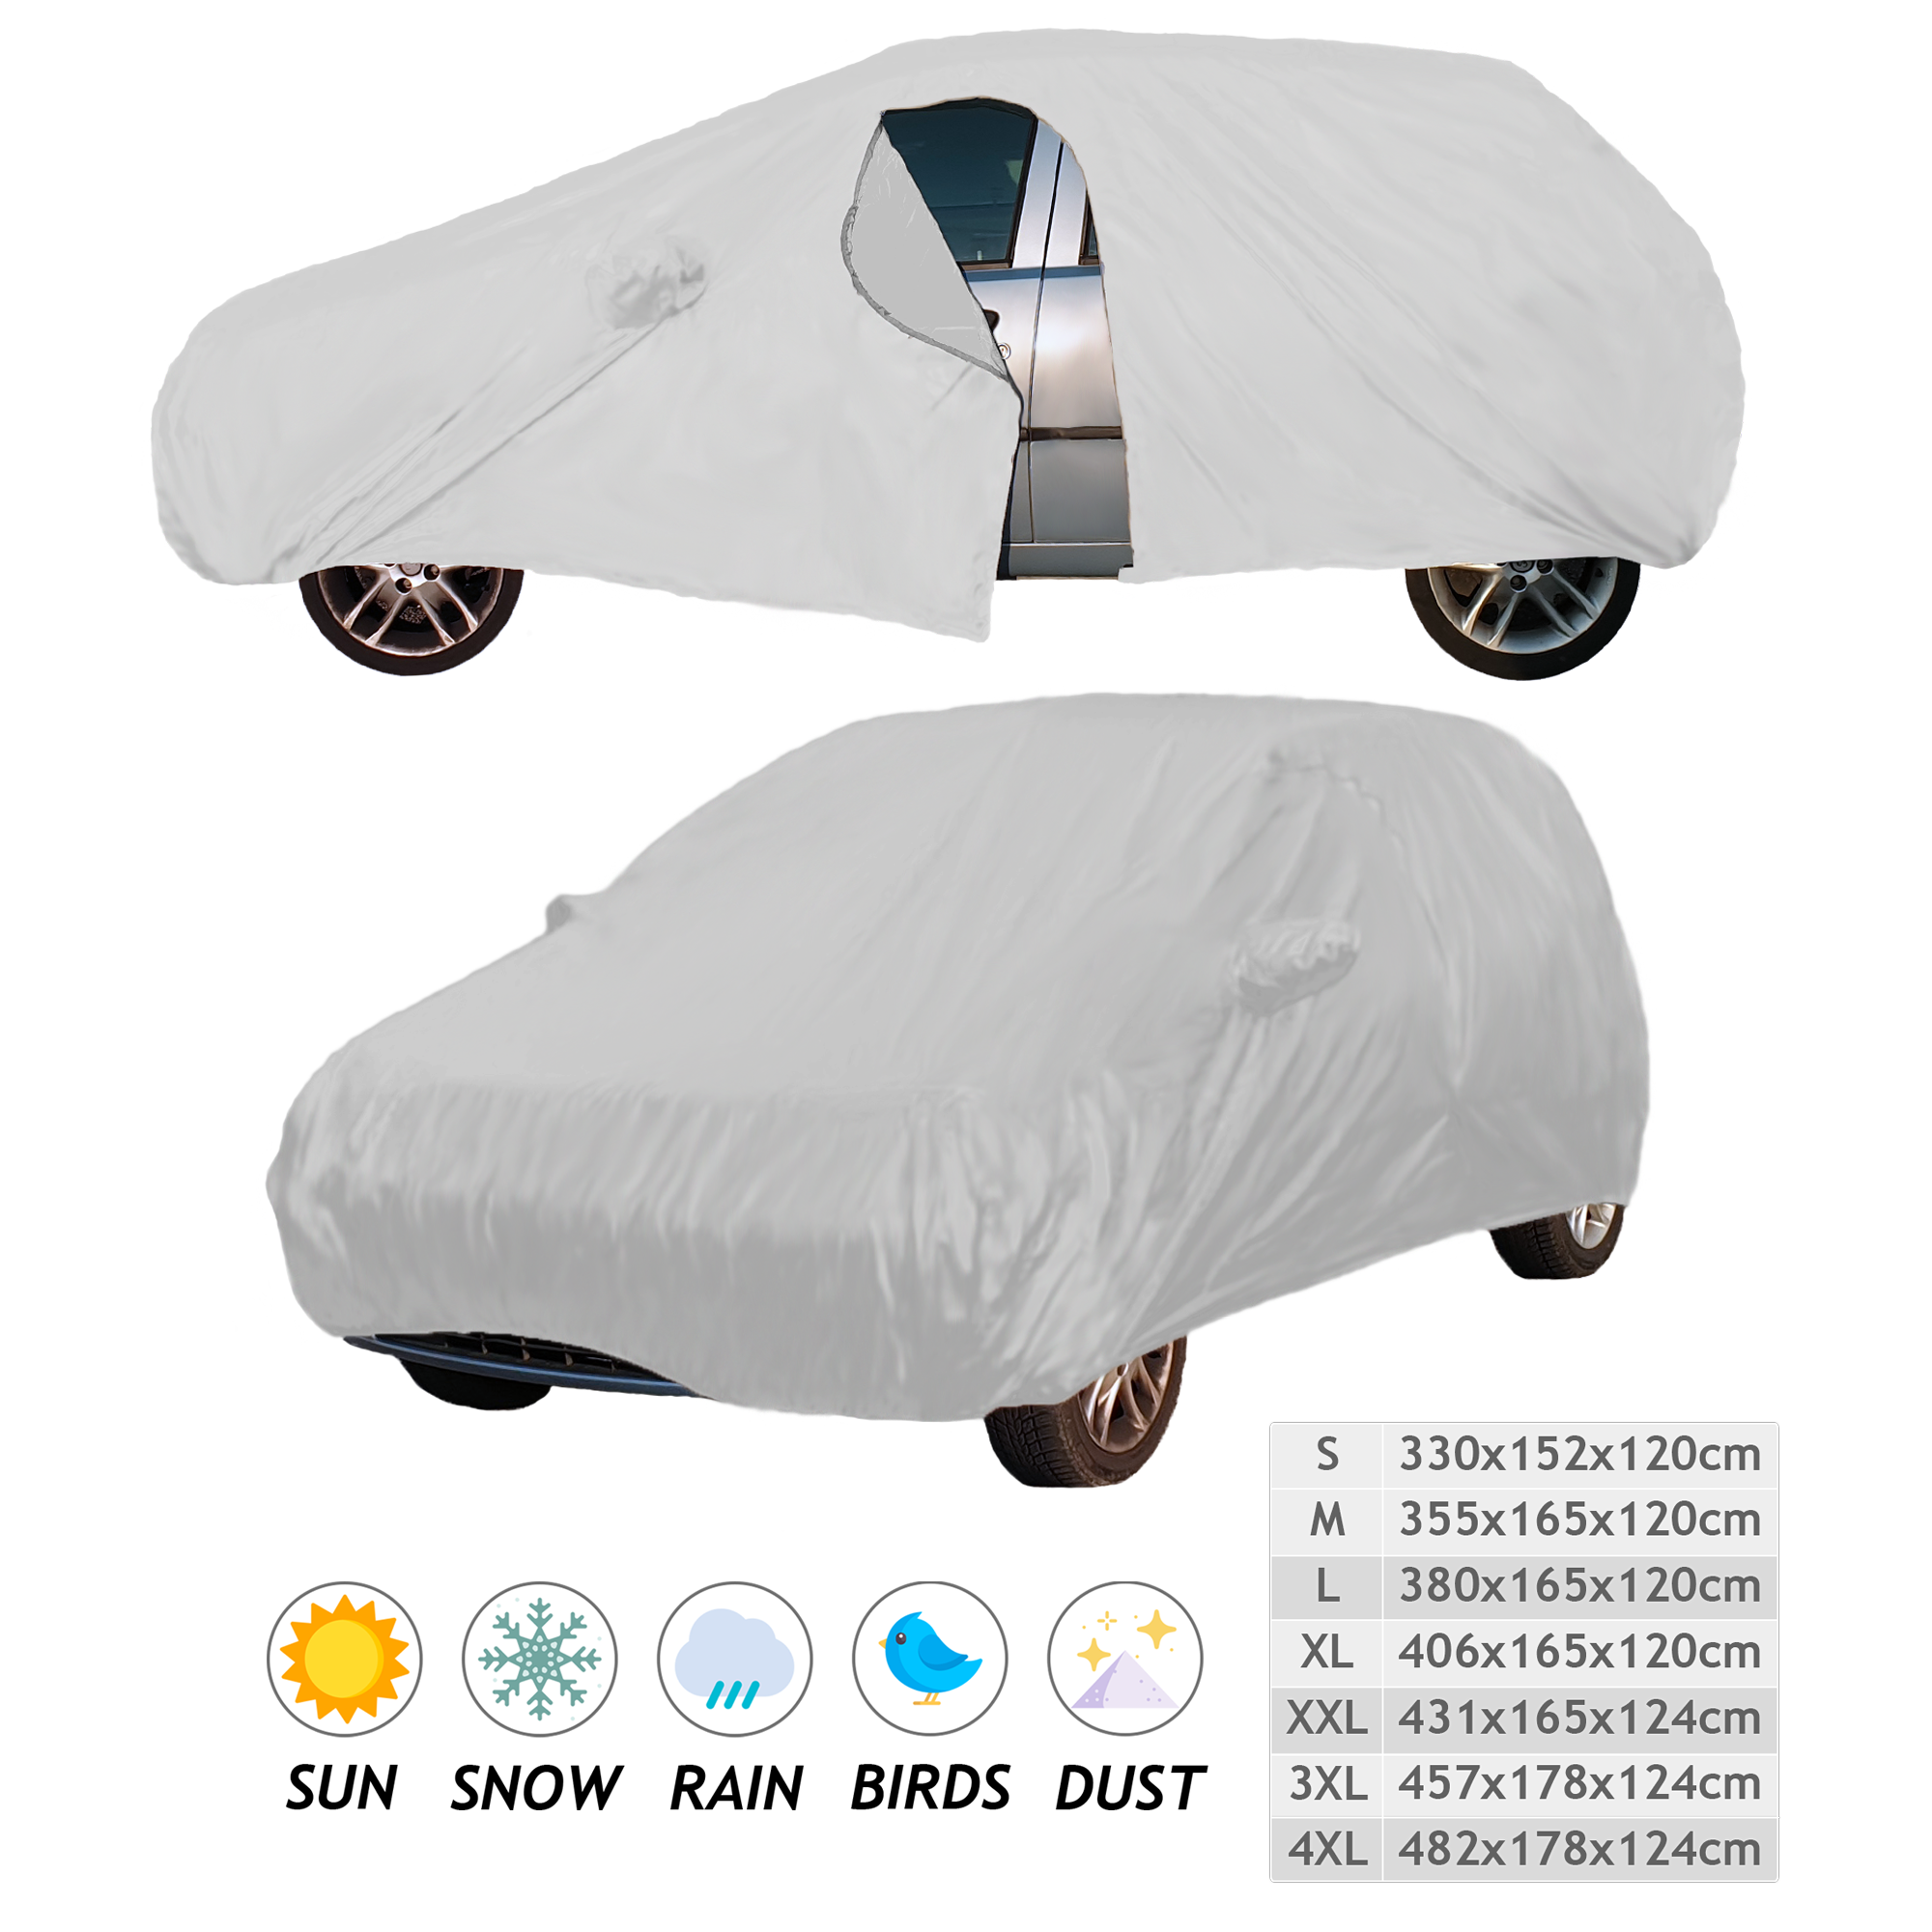 https://www.sonicmotoshop.it/media/catalog/product/c/a/car_cover_501_final.png